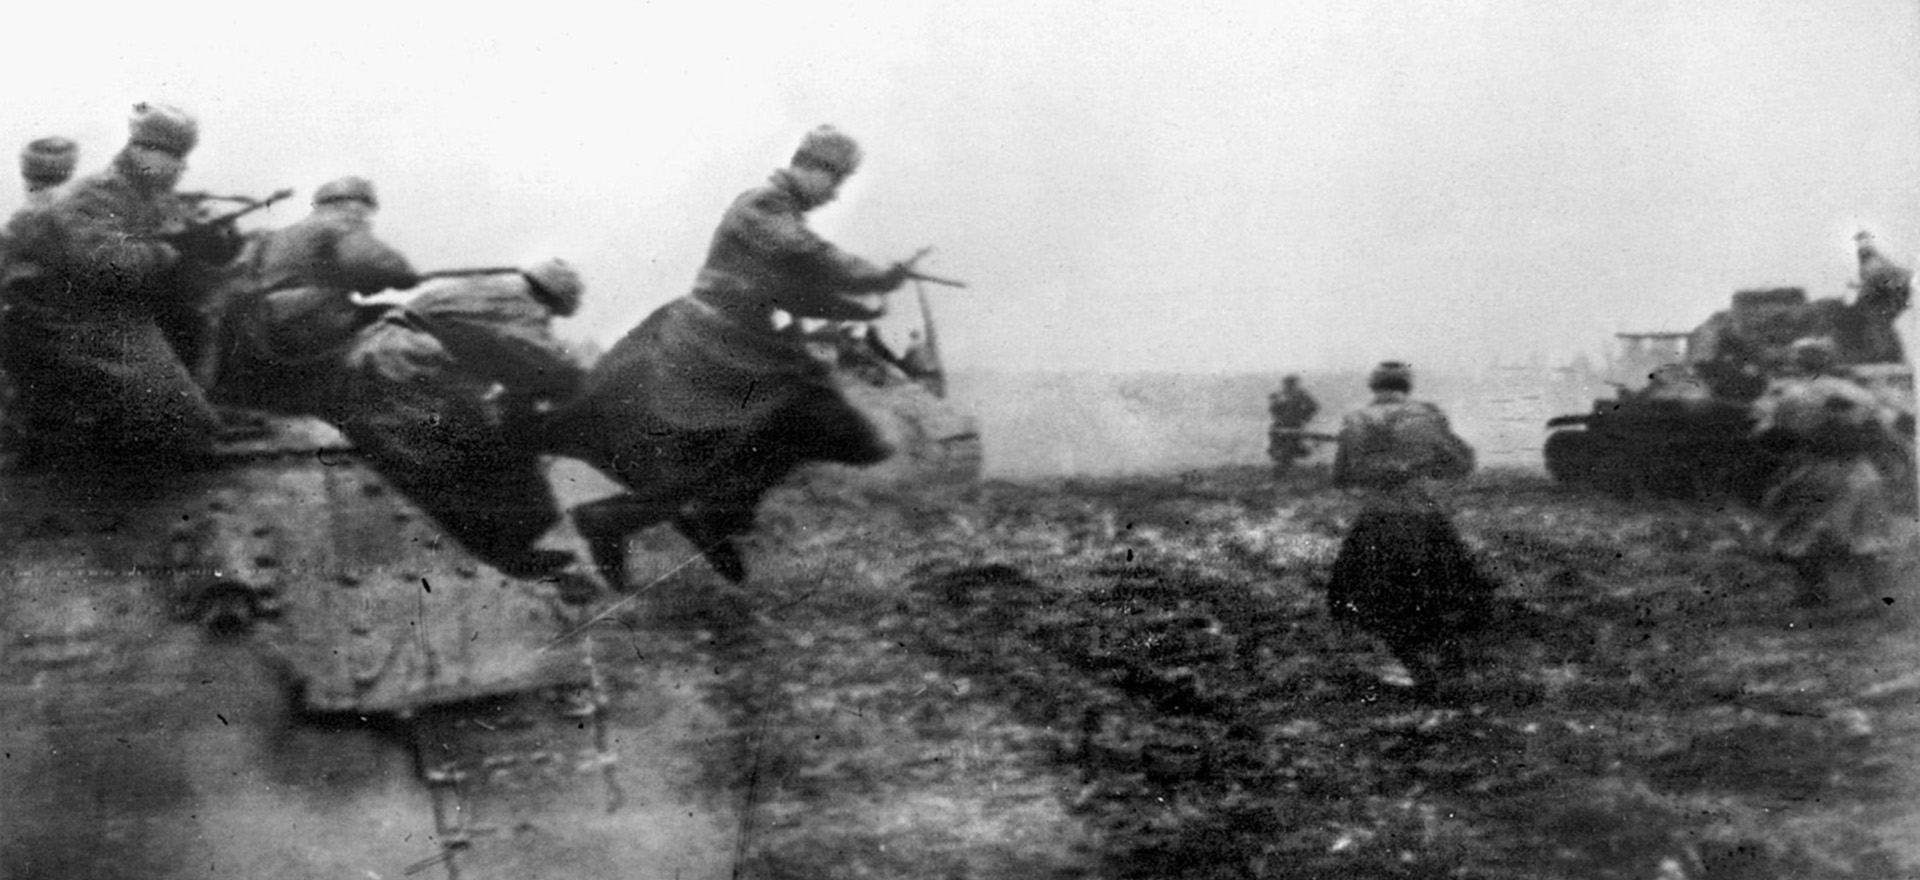 A squad of Red Army machine gunners leap from tanks in an effort to halt the German advance. Soviet losses were heavy but Hitler soon called a halt to the successful Operation South Wind to mount another—Operation Spring Awakening—an attempt to secure vital oil reserves in Hungary that proved to be a failure.